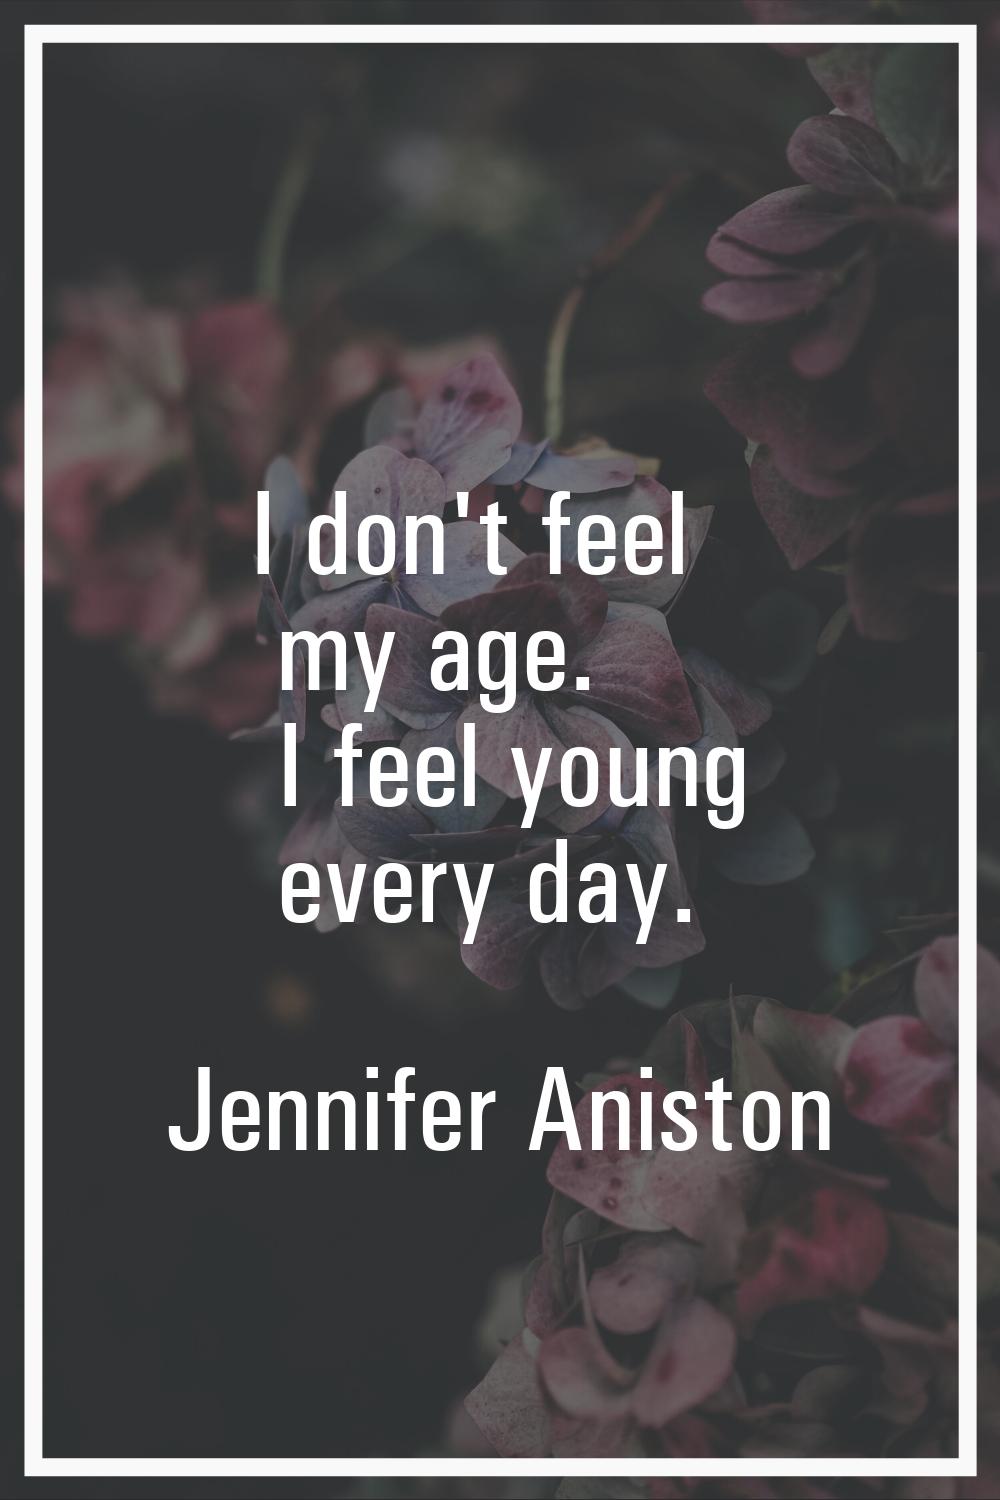 I don't feel my age. I feel young every day.